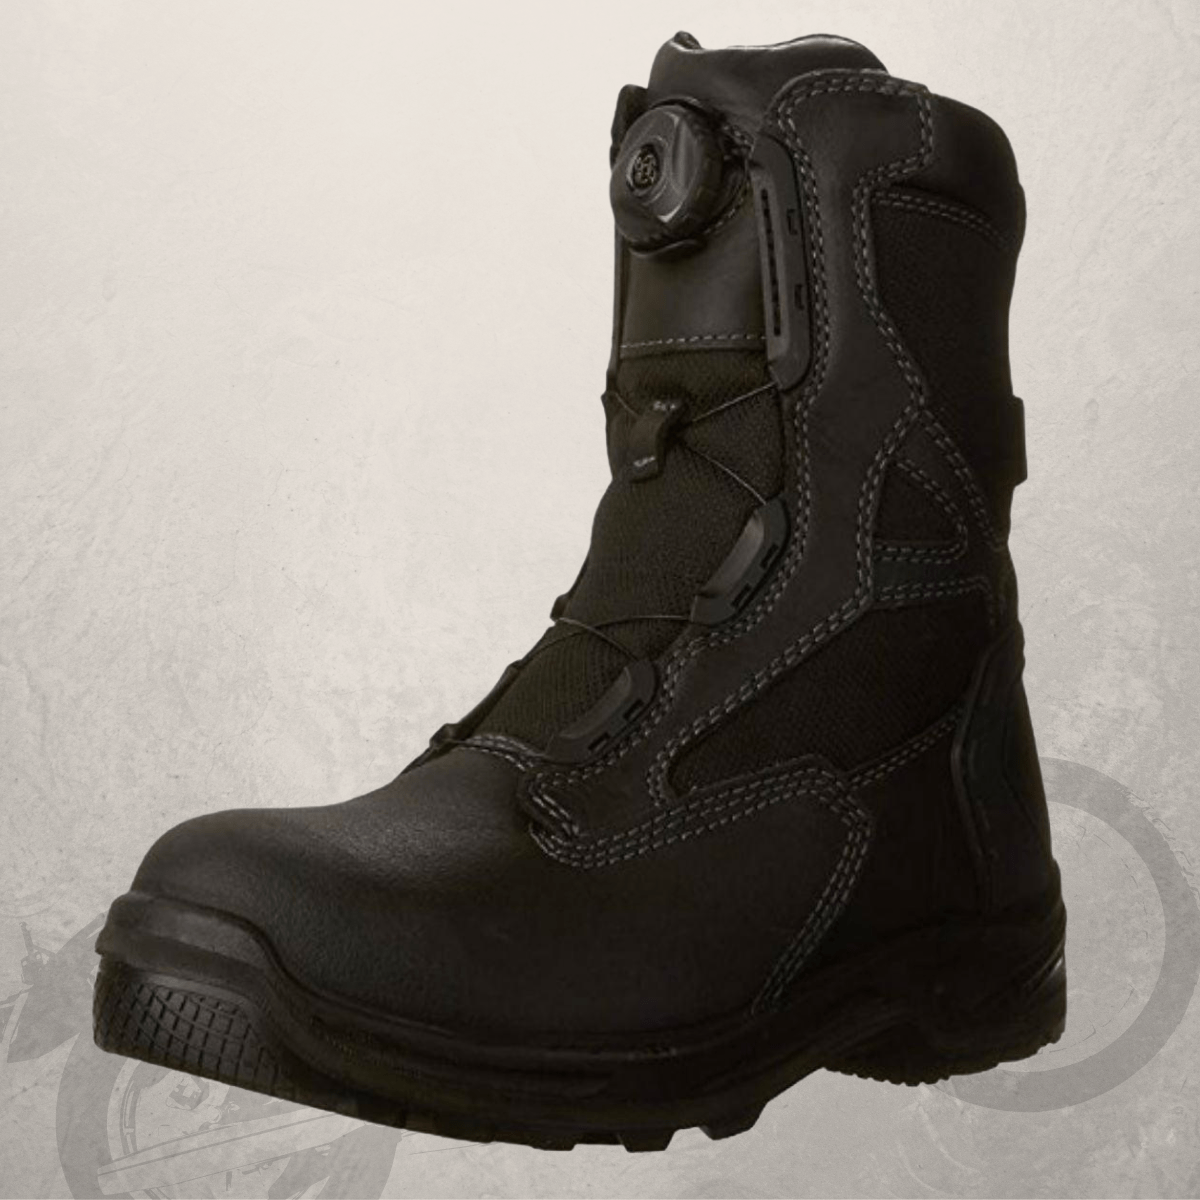 A pair of Boa Work Boots Terra Rexton BOA® Best for Motorcycle & Work work boots, featuring safety features, on a grey background.